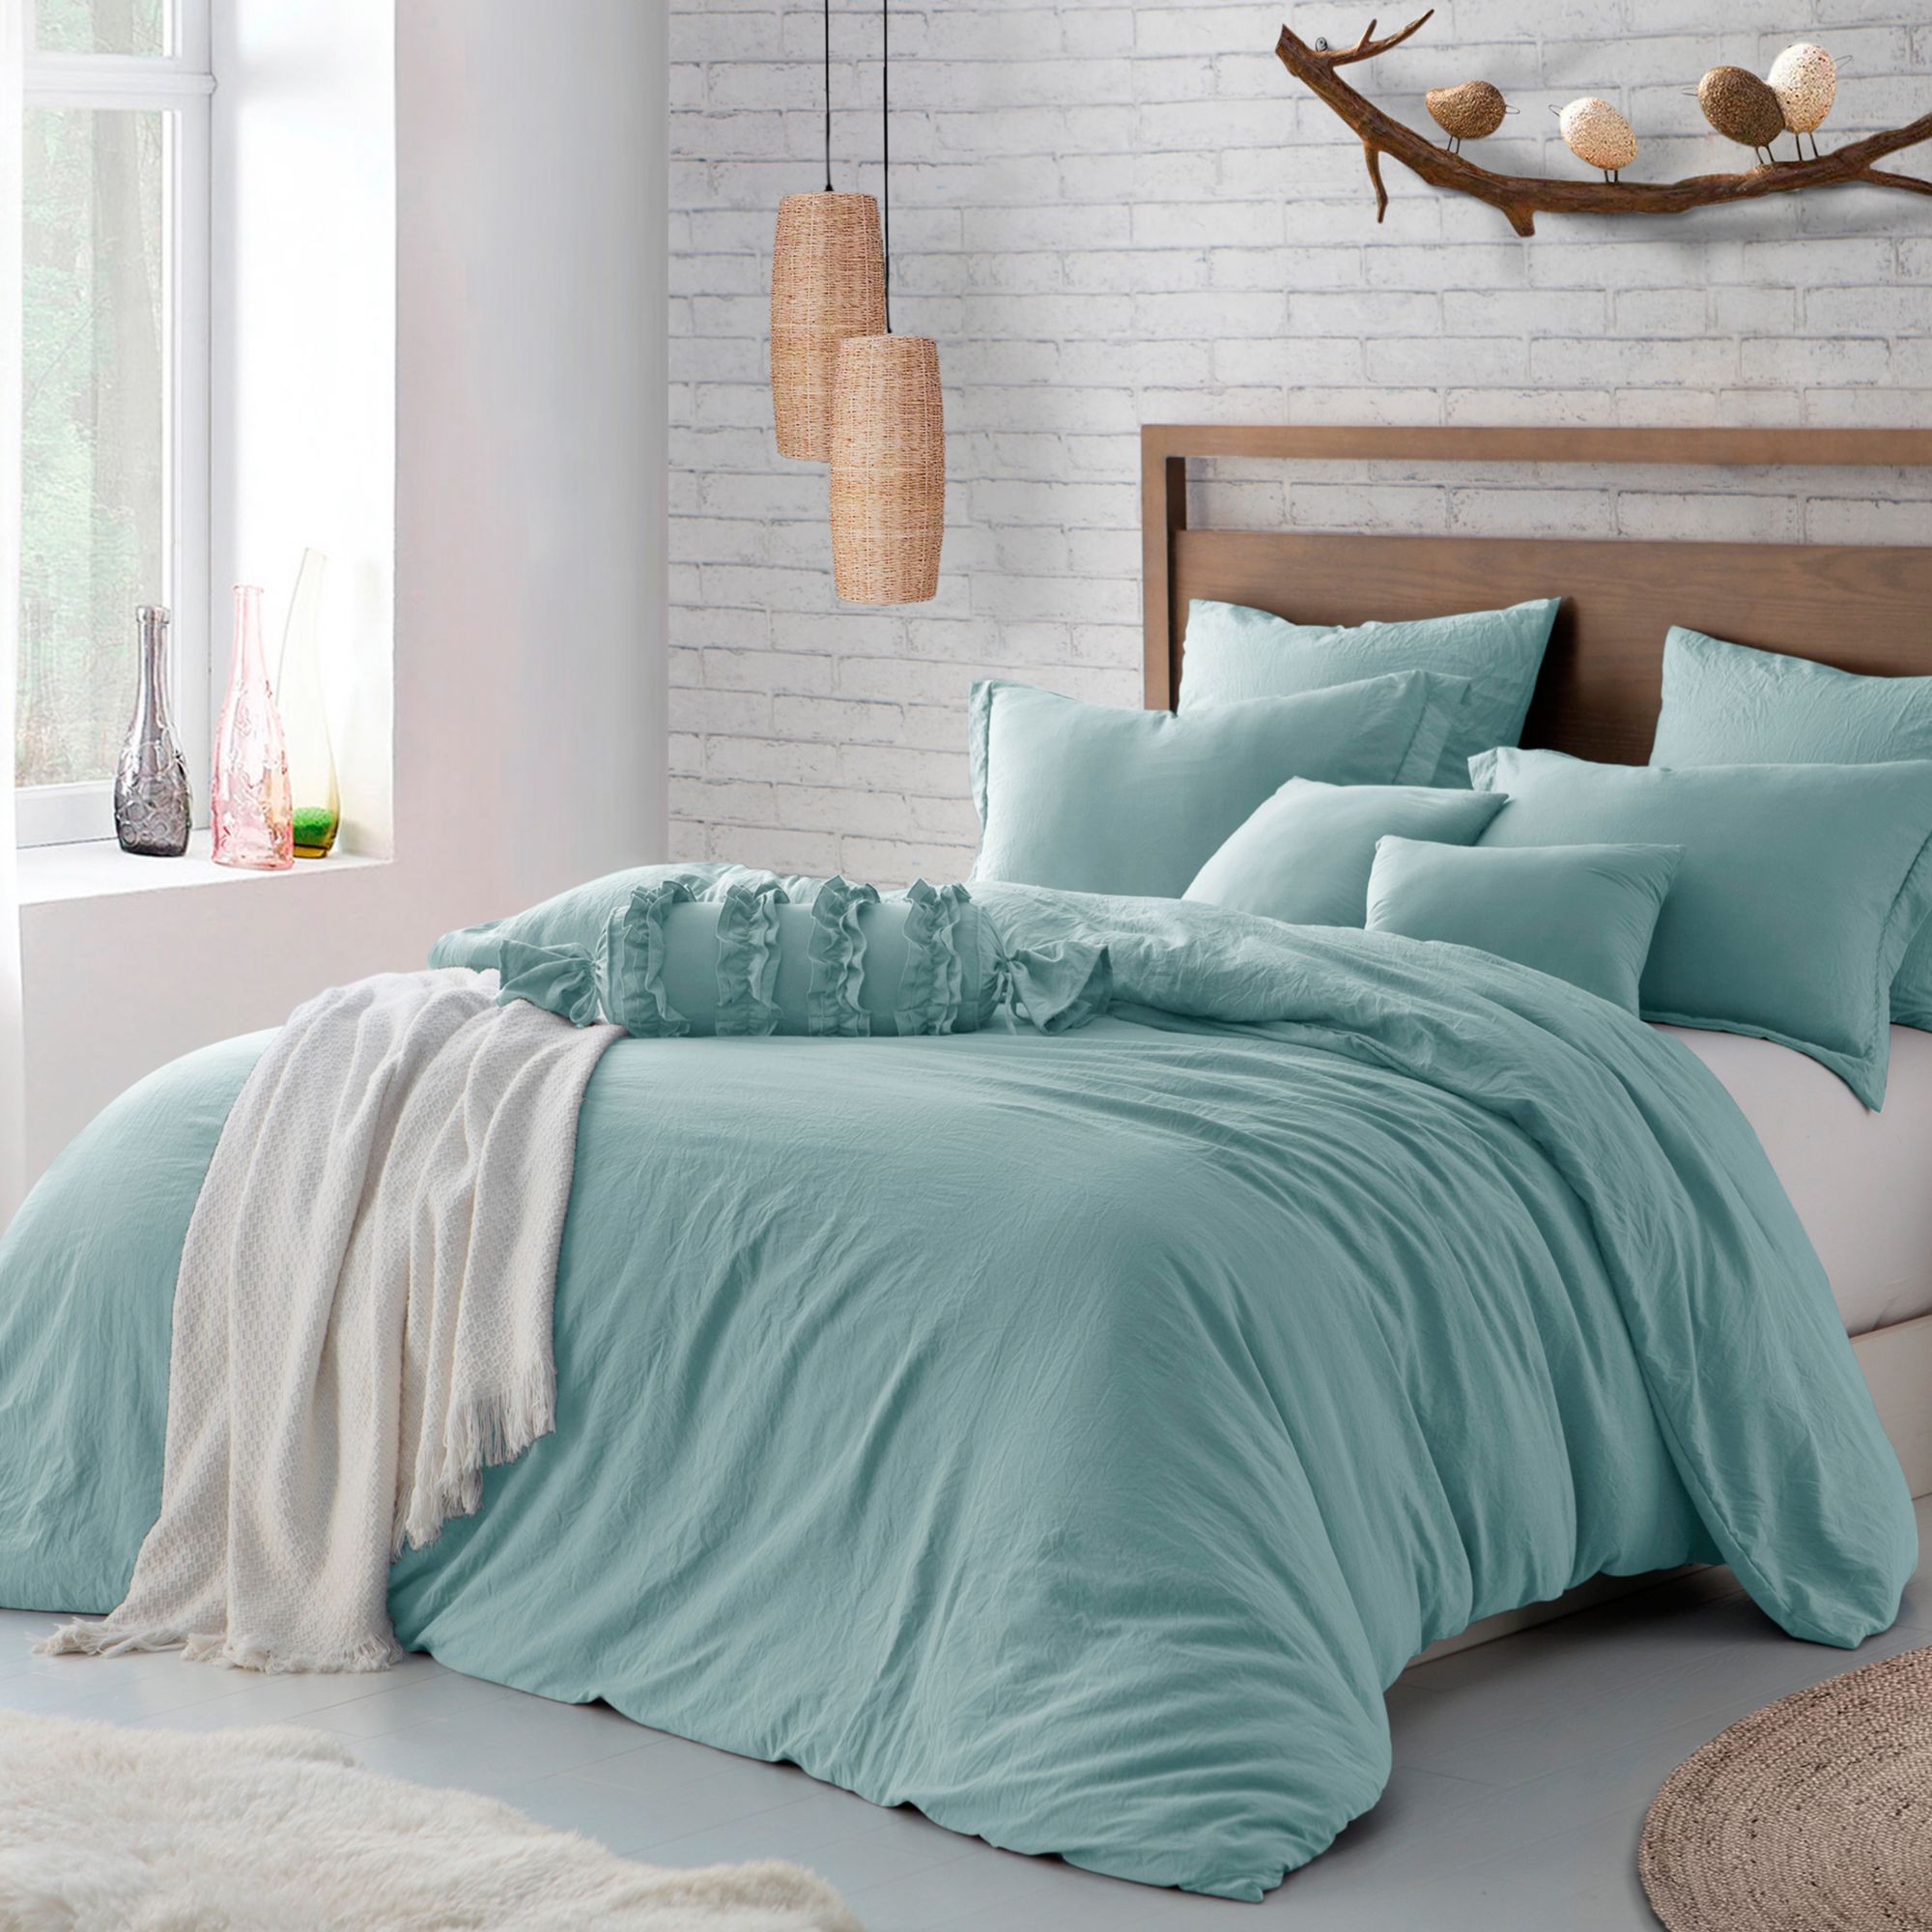 Tranquility BeComfy King Comforter - Gray